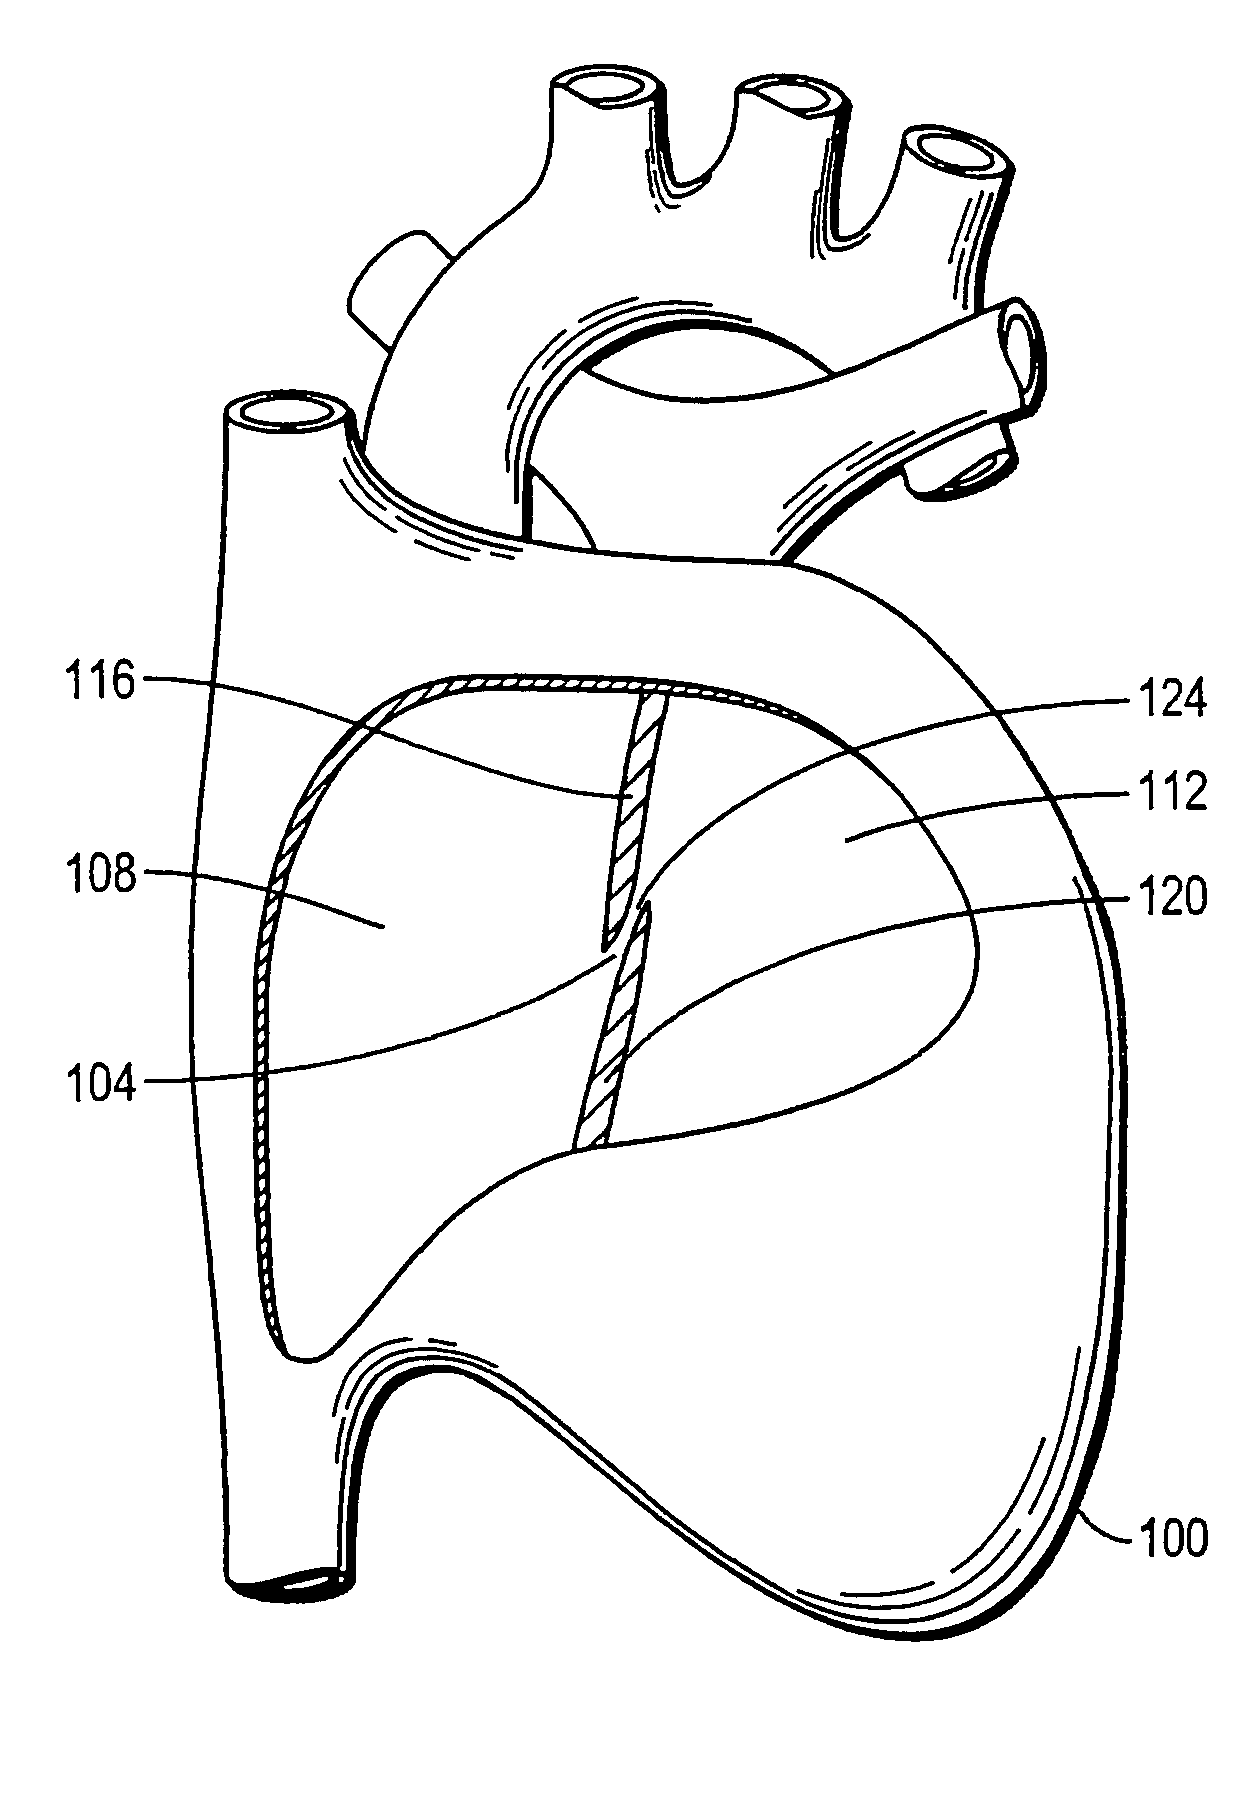 Device with biological tissue scaffold for percutaneous closure of an intracardiac defect and methods thereof